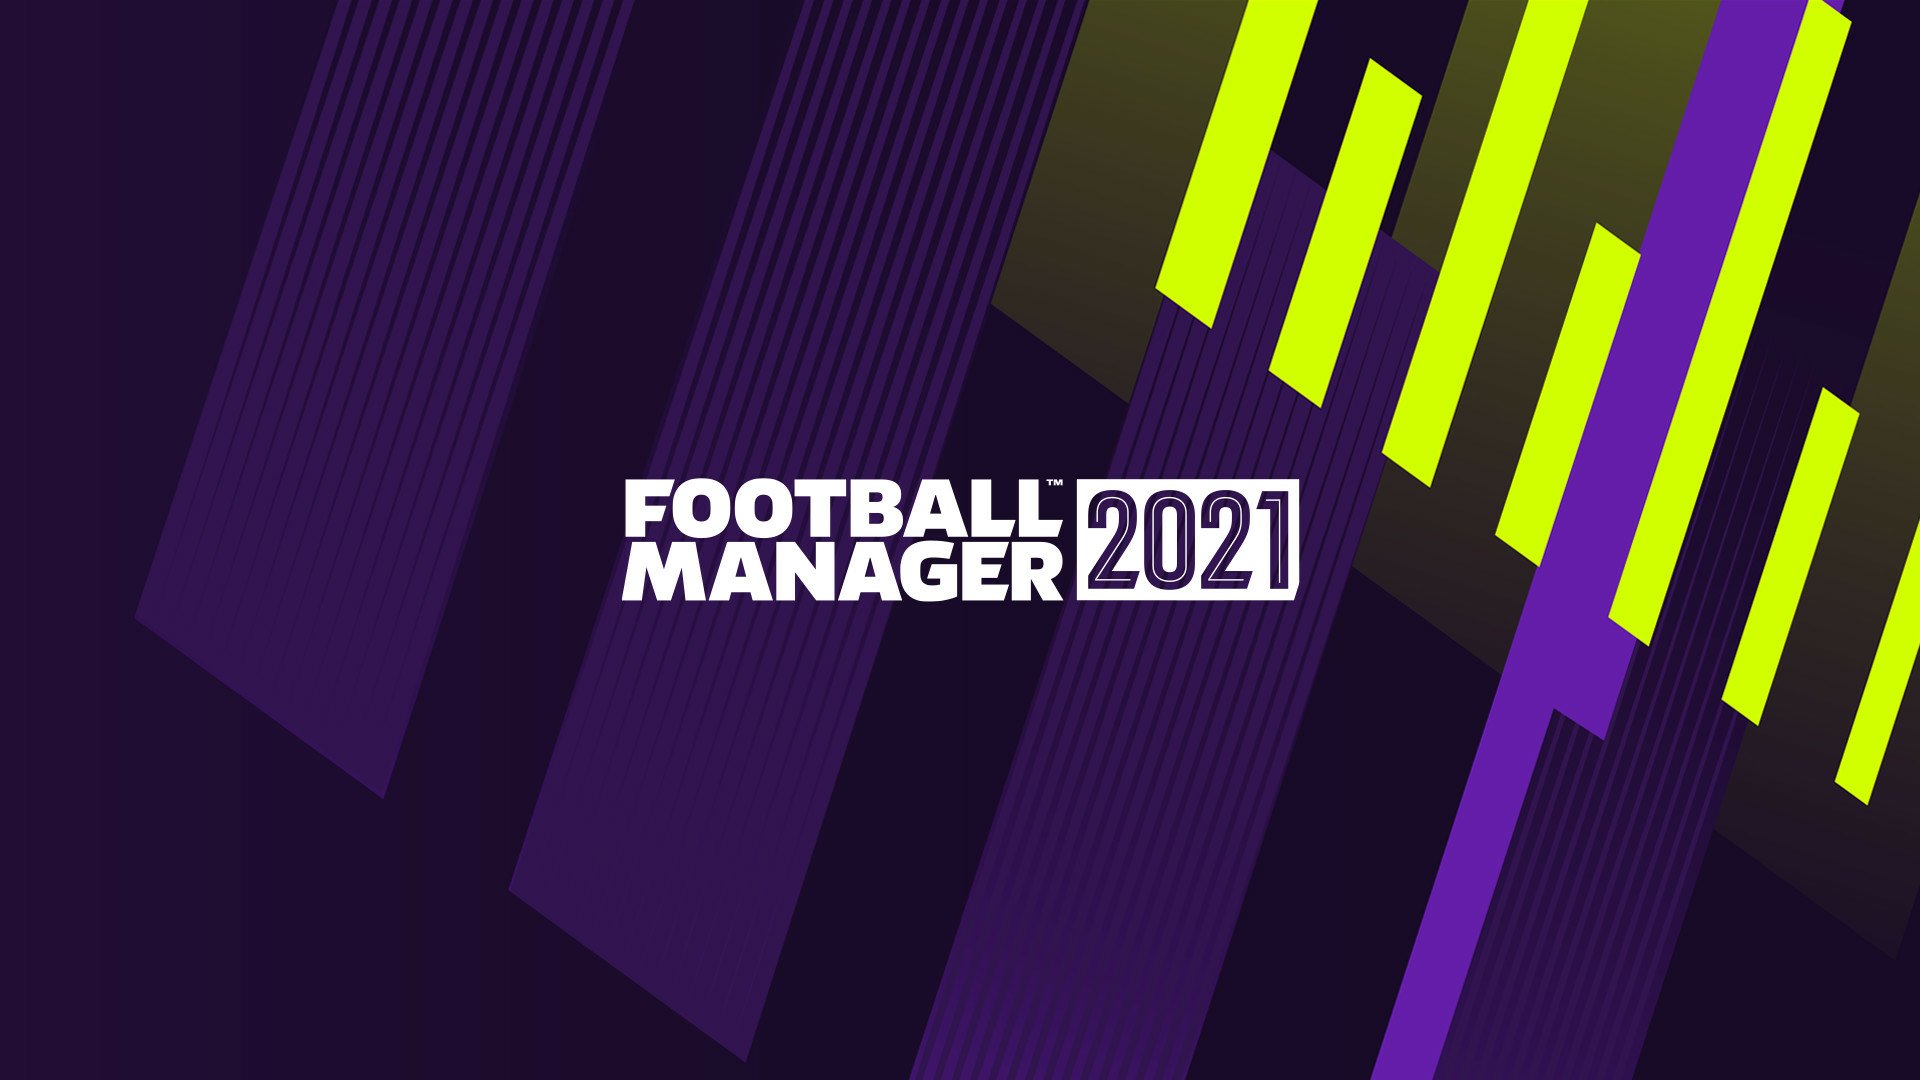 Video Game Football Manager 2021 HD Wallpaper